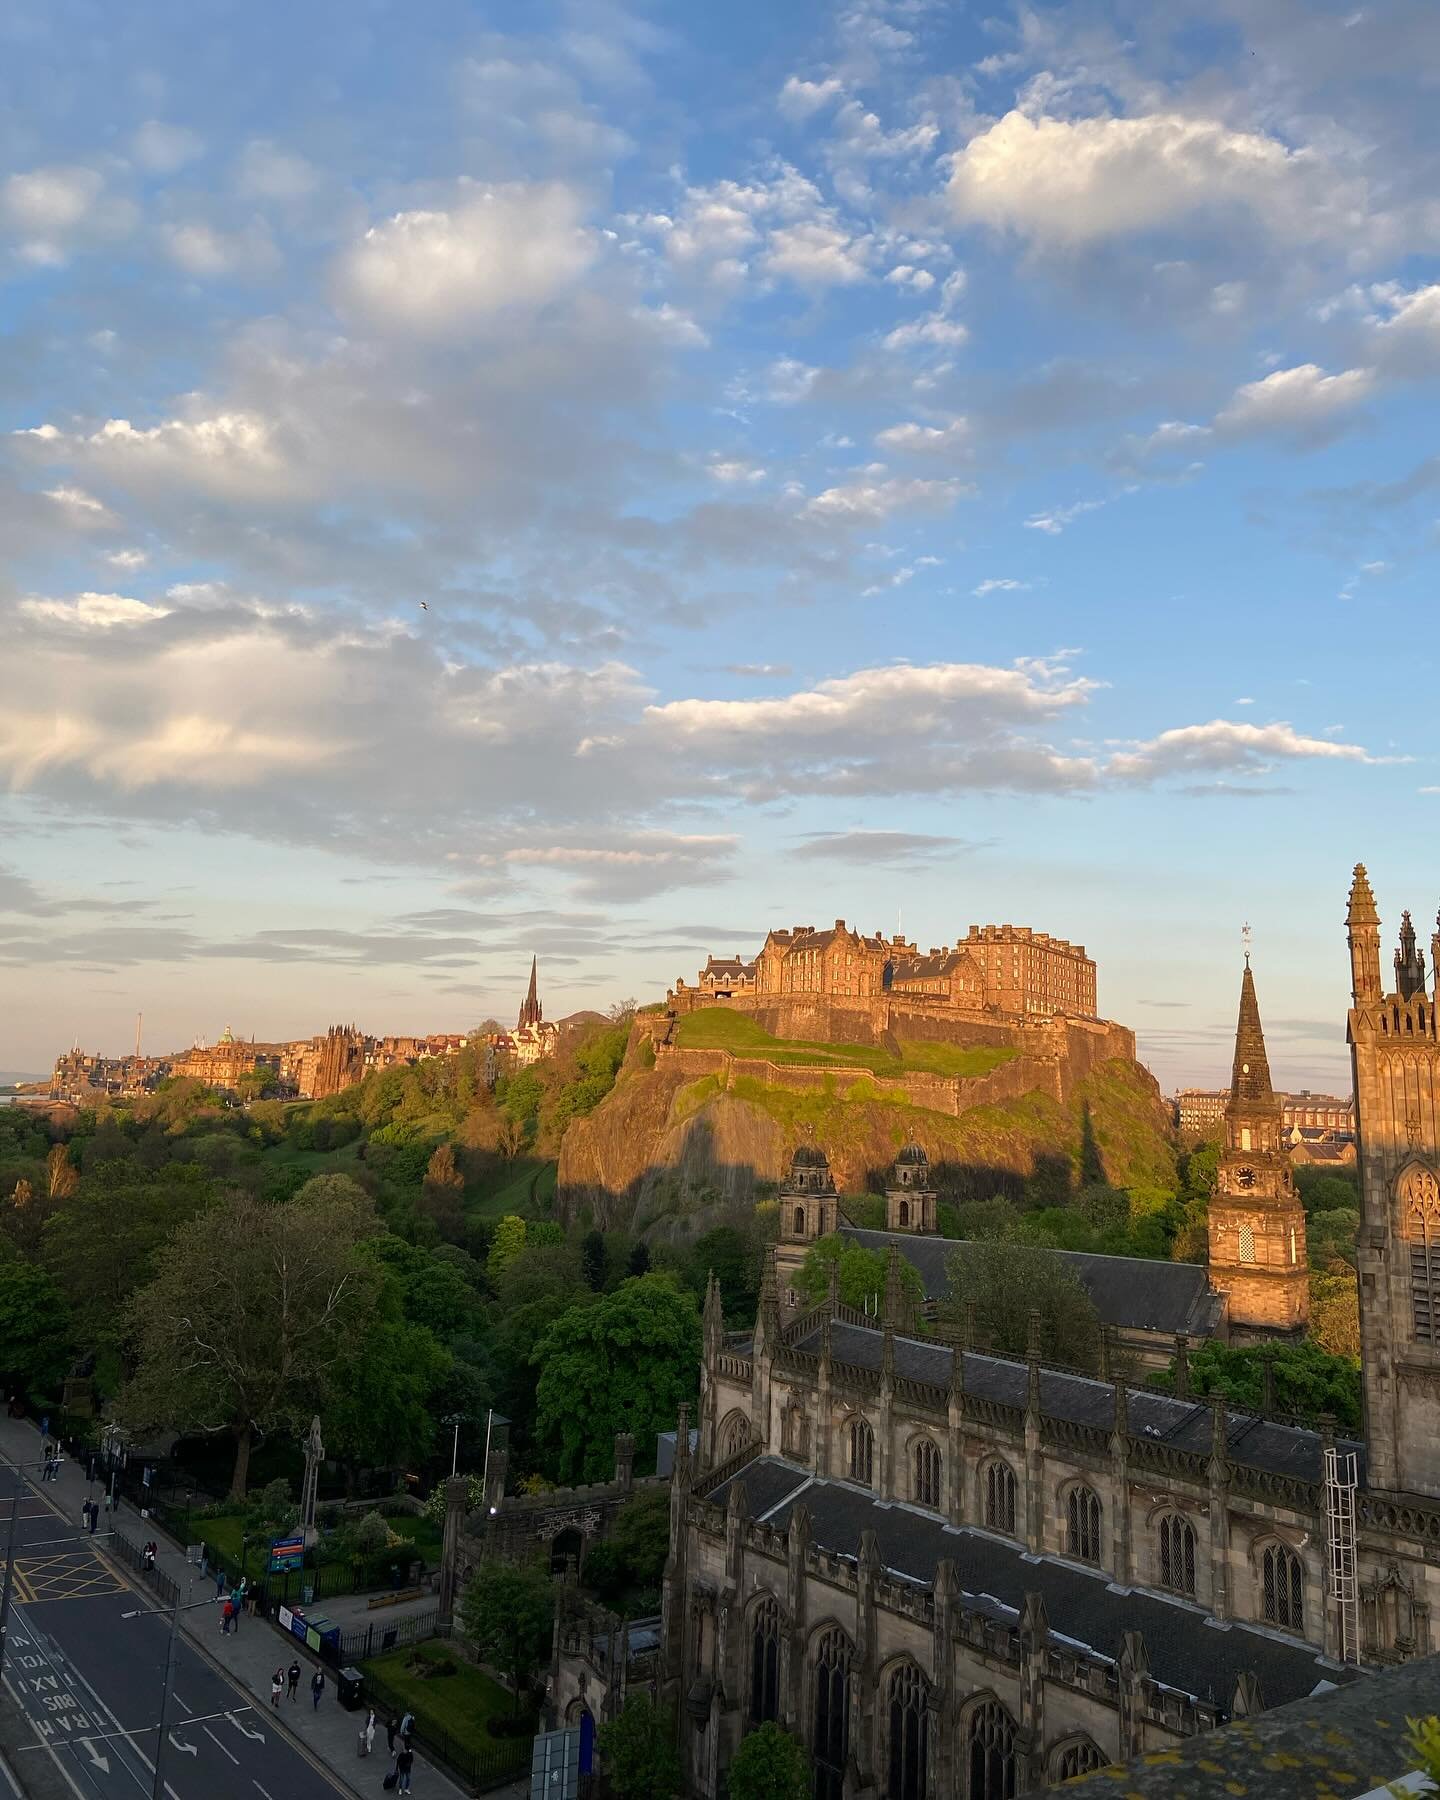 A love letter to the city of fire and ice 🏰⁣⁣⁣
⁣⁣⁣
How easy you are to love, from your most decadent sunny afternoons lounging in the Princes Street Gardens to walking amongst a sea of ogling tourists, chaotically maneuvering amongst the royal mile⁣